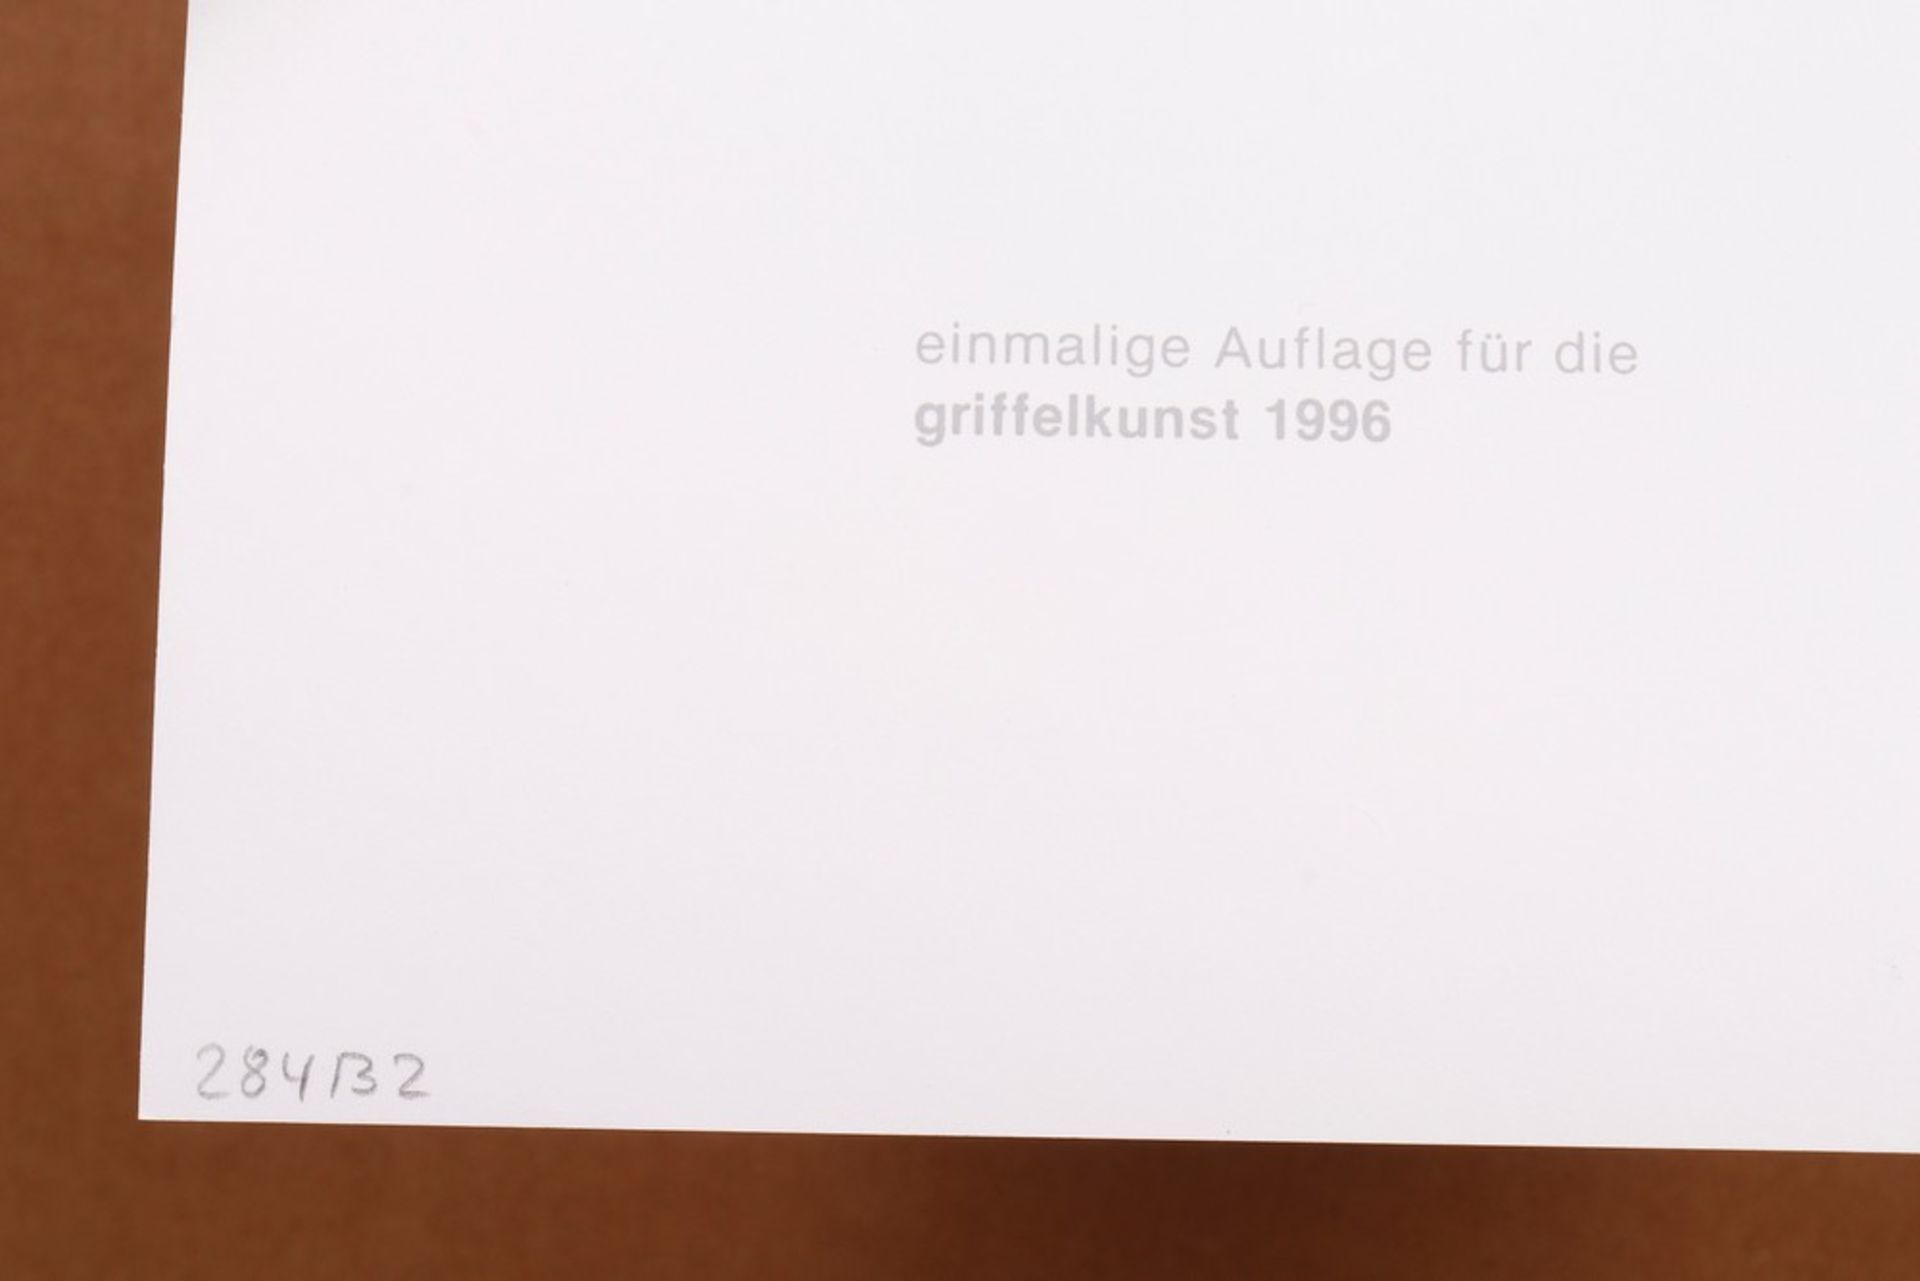 4 B/W photographs, Griffelkunst, 1996/98 - Image 3 of 13